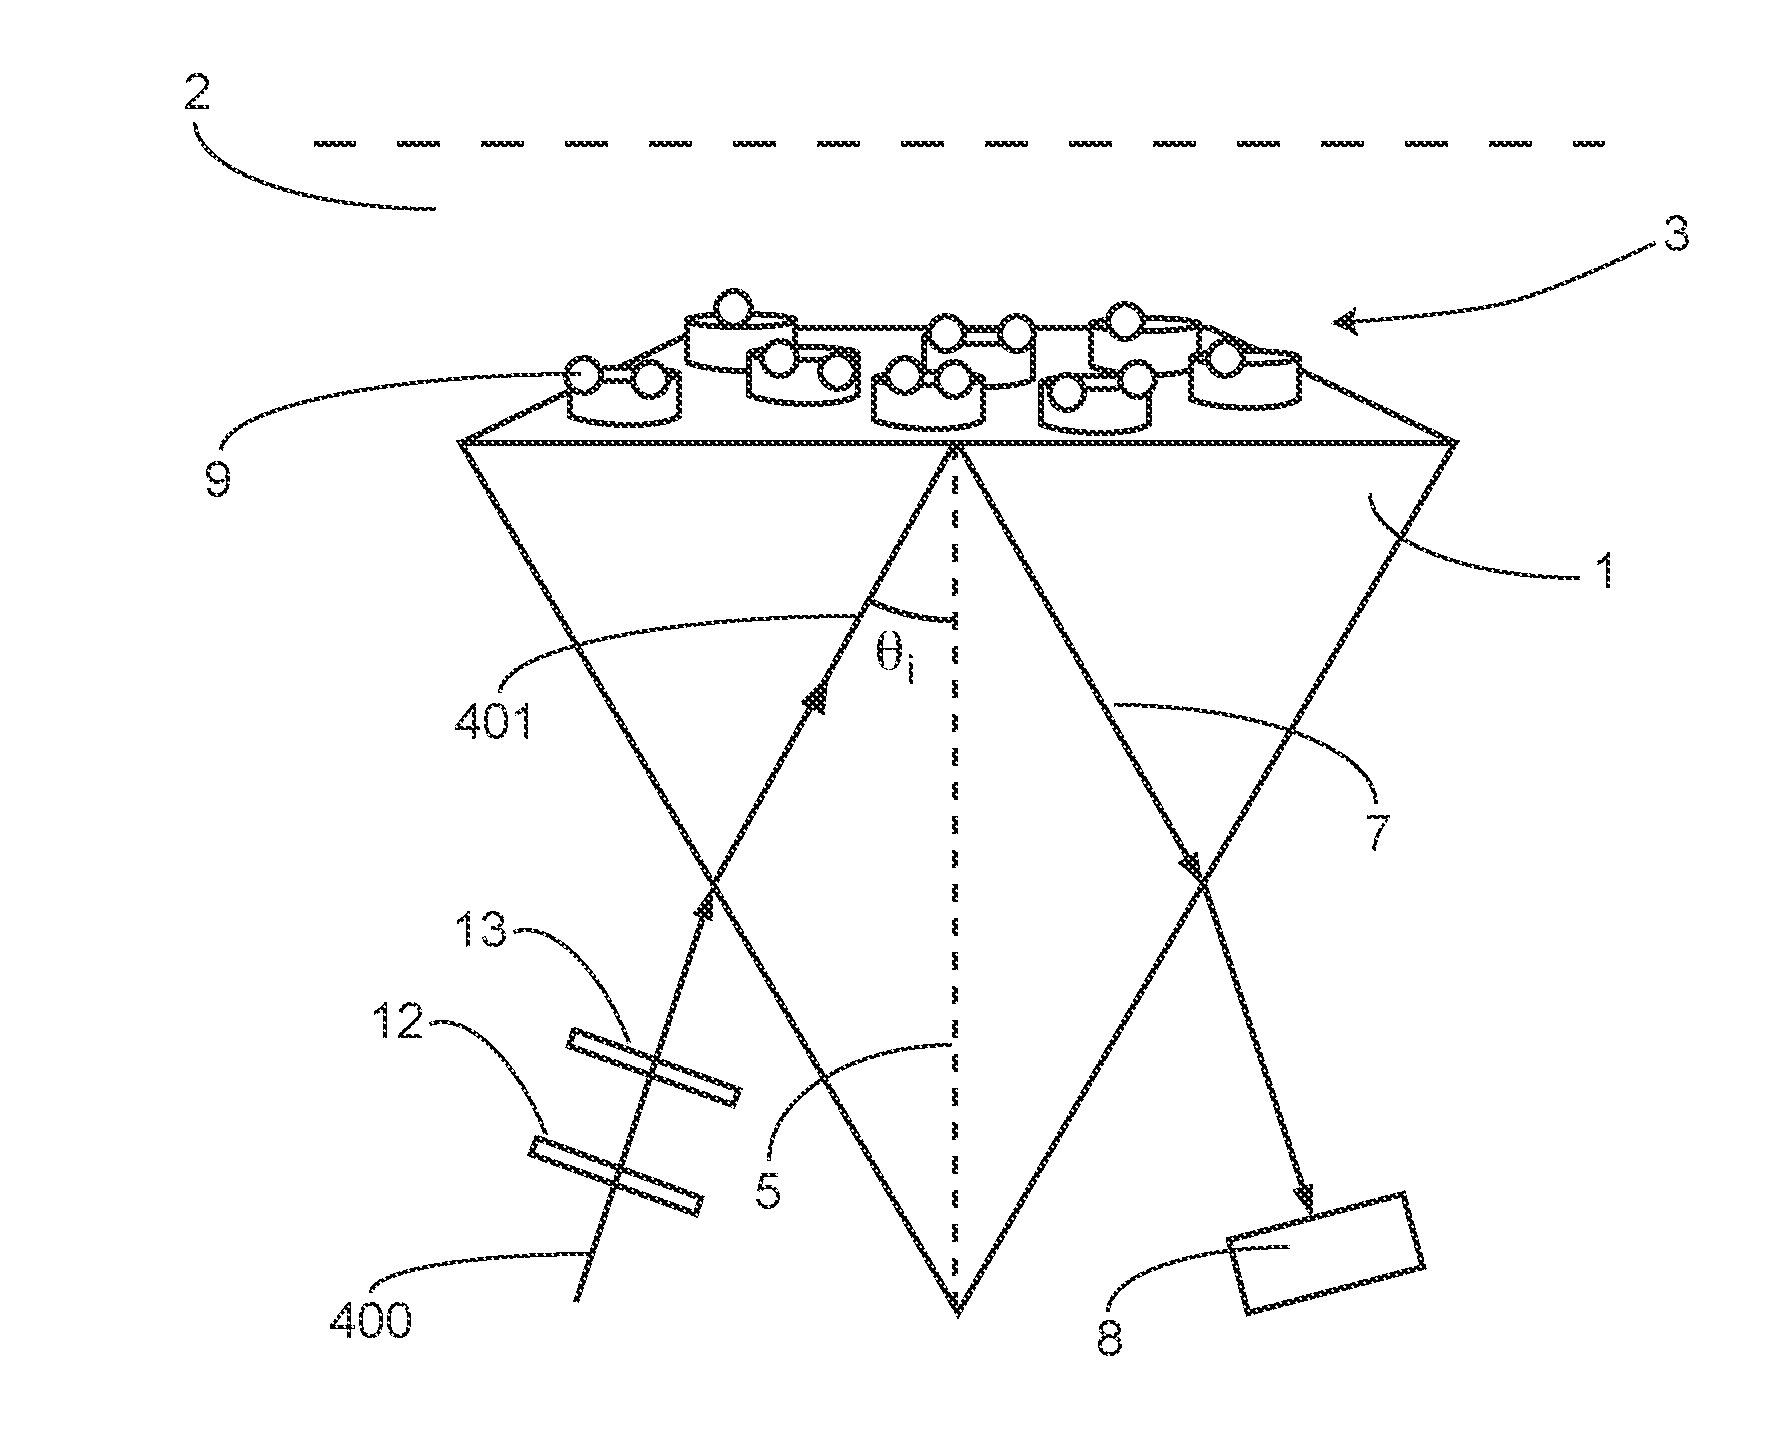 Method for exciting a sub-wavelength inclusion structure